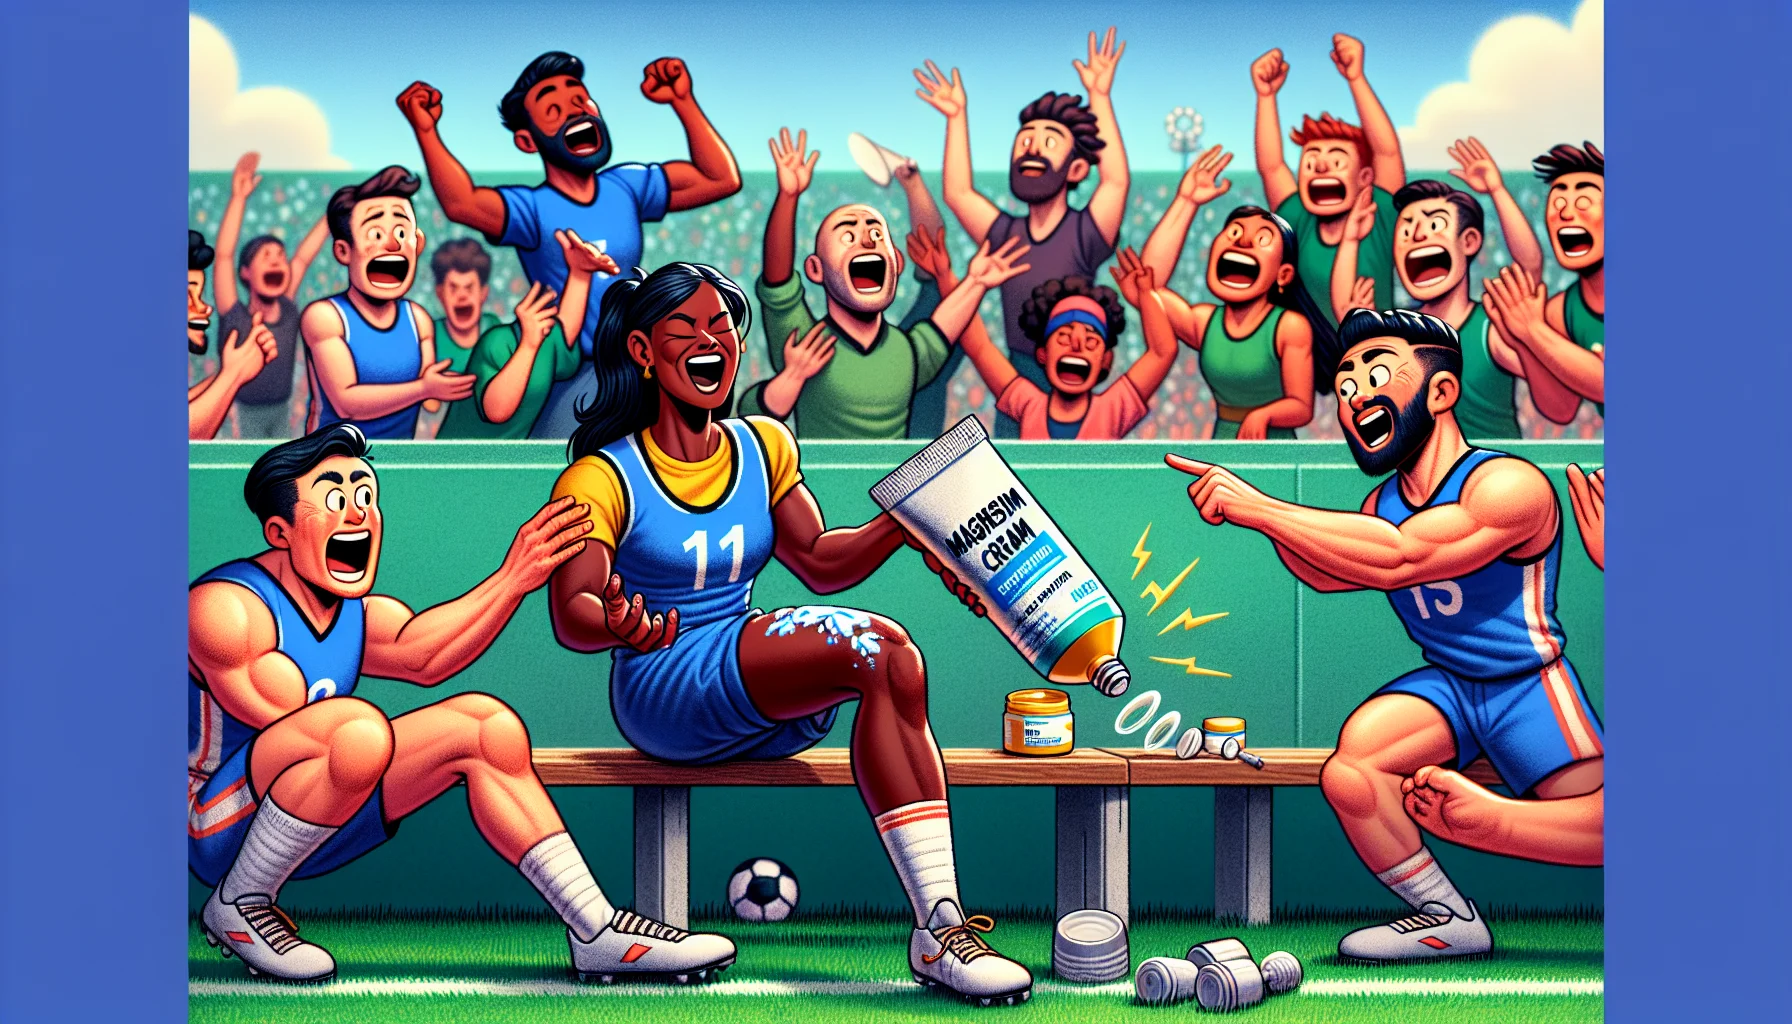 Draw a humorous setting featuring a muscular South-Asian female athlete applying magnesium cream to her leg to ease cramps amid a sporting event. She is on the sideline of a grassy athletic field, surrounded by her diverse teammates who are outlandishly reacting with expressions of surprise, amazement, and excitement. They're pointing at the cream tube with visible relief, as they witness the swift recovery of their companion. The container of cream is clearly labeled as 'Magnesium Cream' and there's a cute cartoony mascot indicating how it's for leg cramps. The scene encourages the viewer to consider supplements for sports performance.